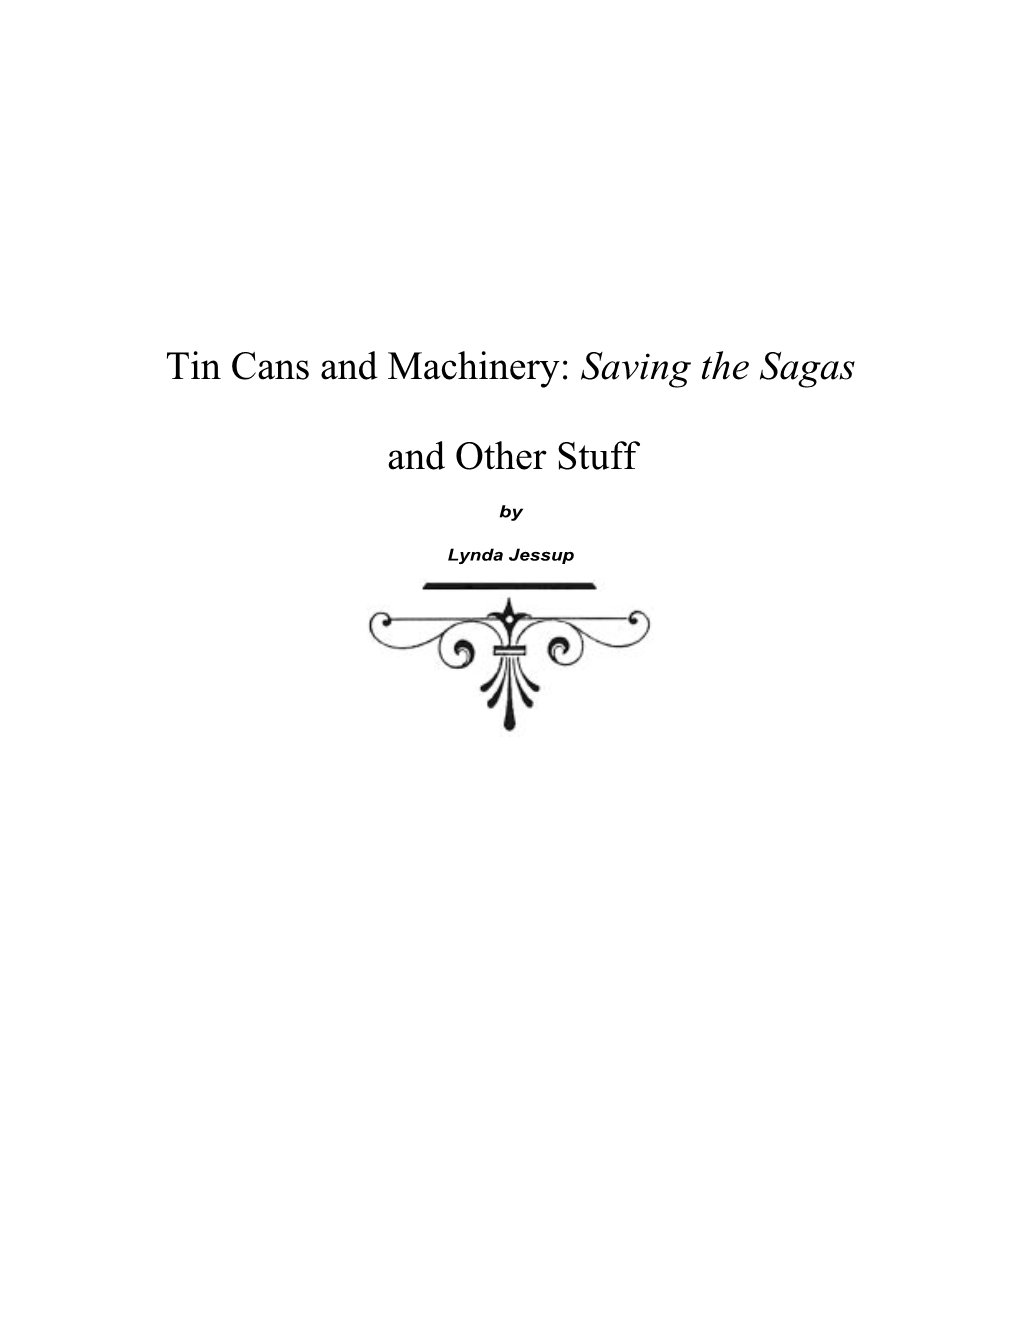 Tin Cans and Machinery: Saving the Sagas and Other Stuff